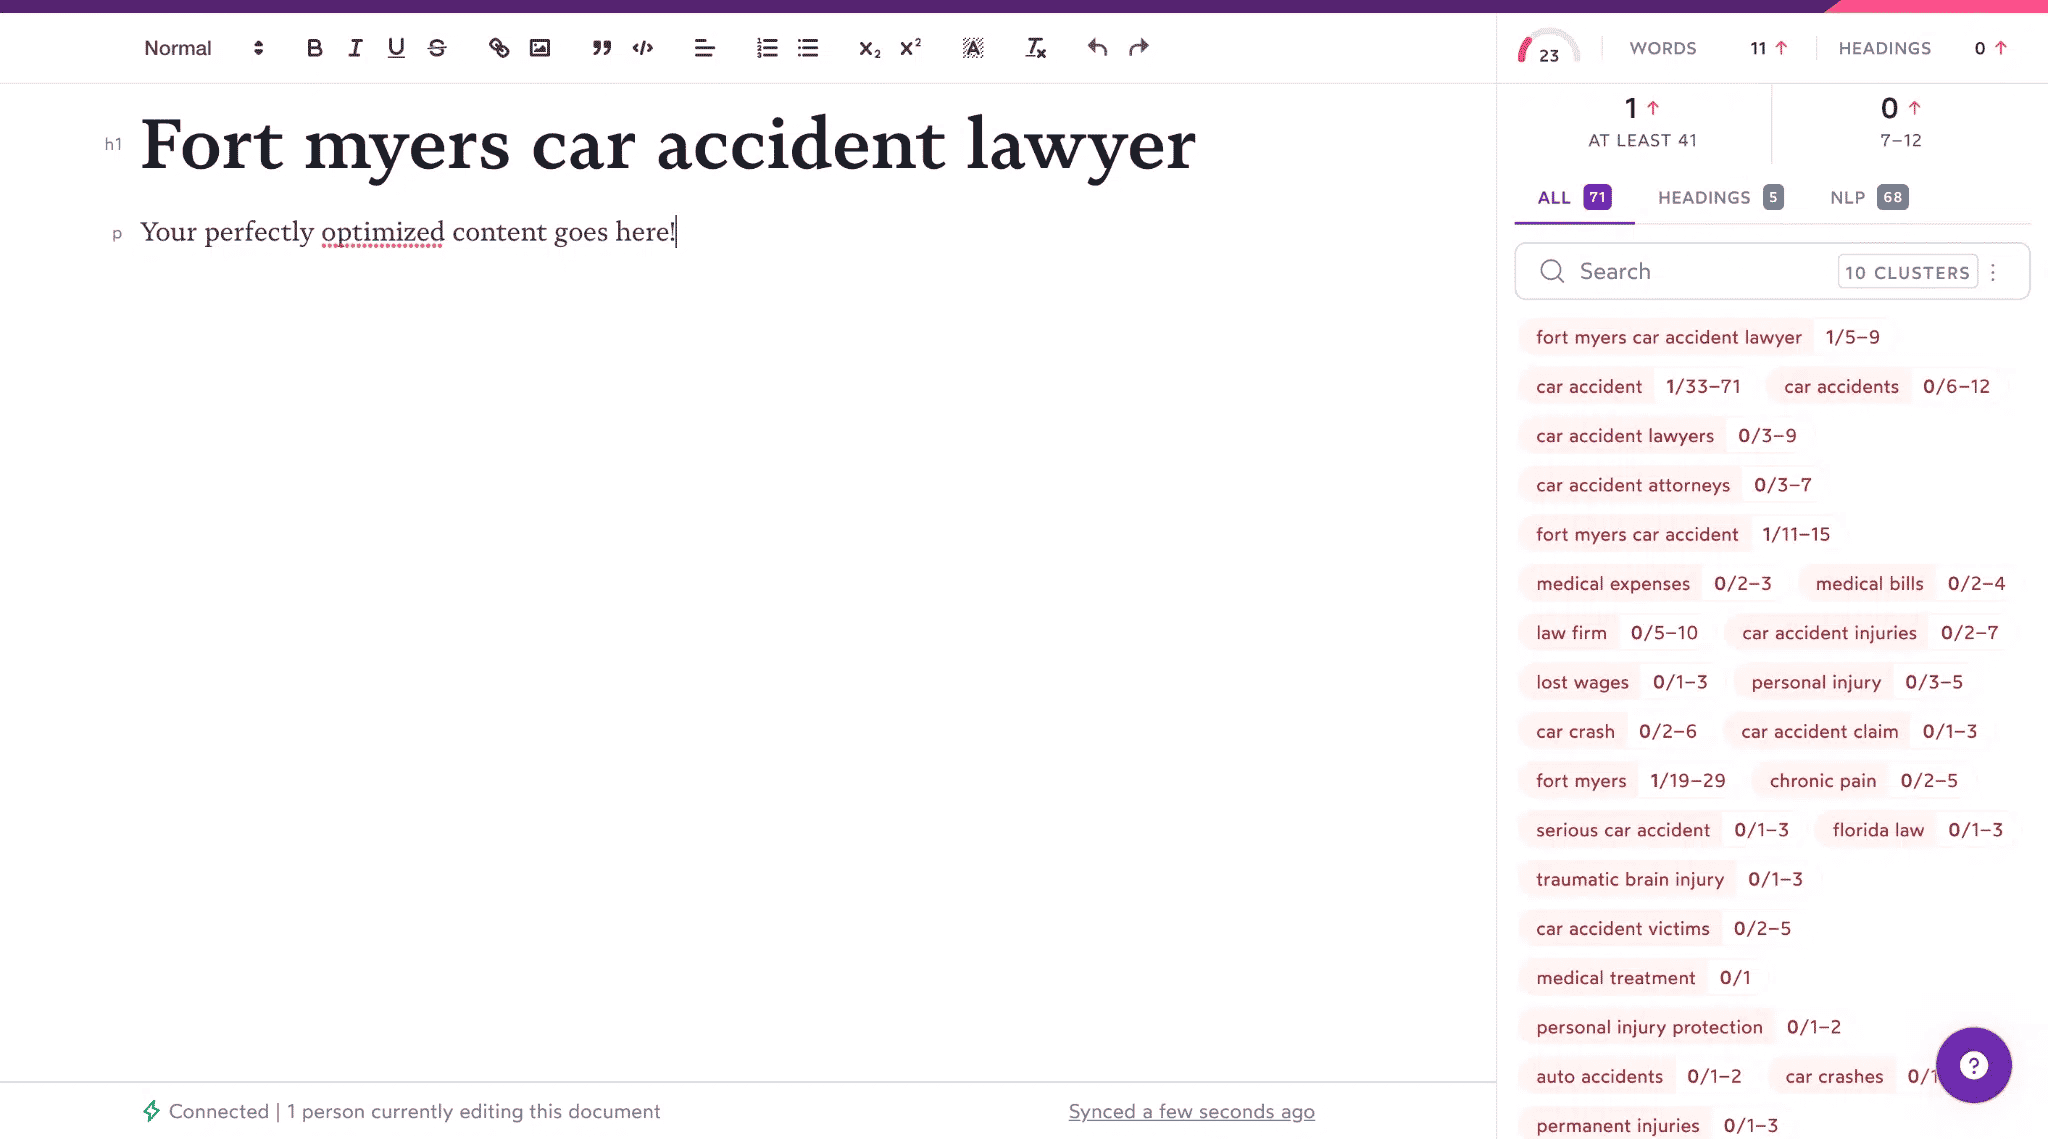 Car accident lawyer content